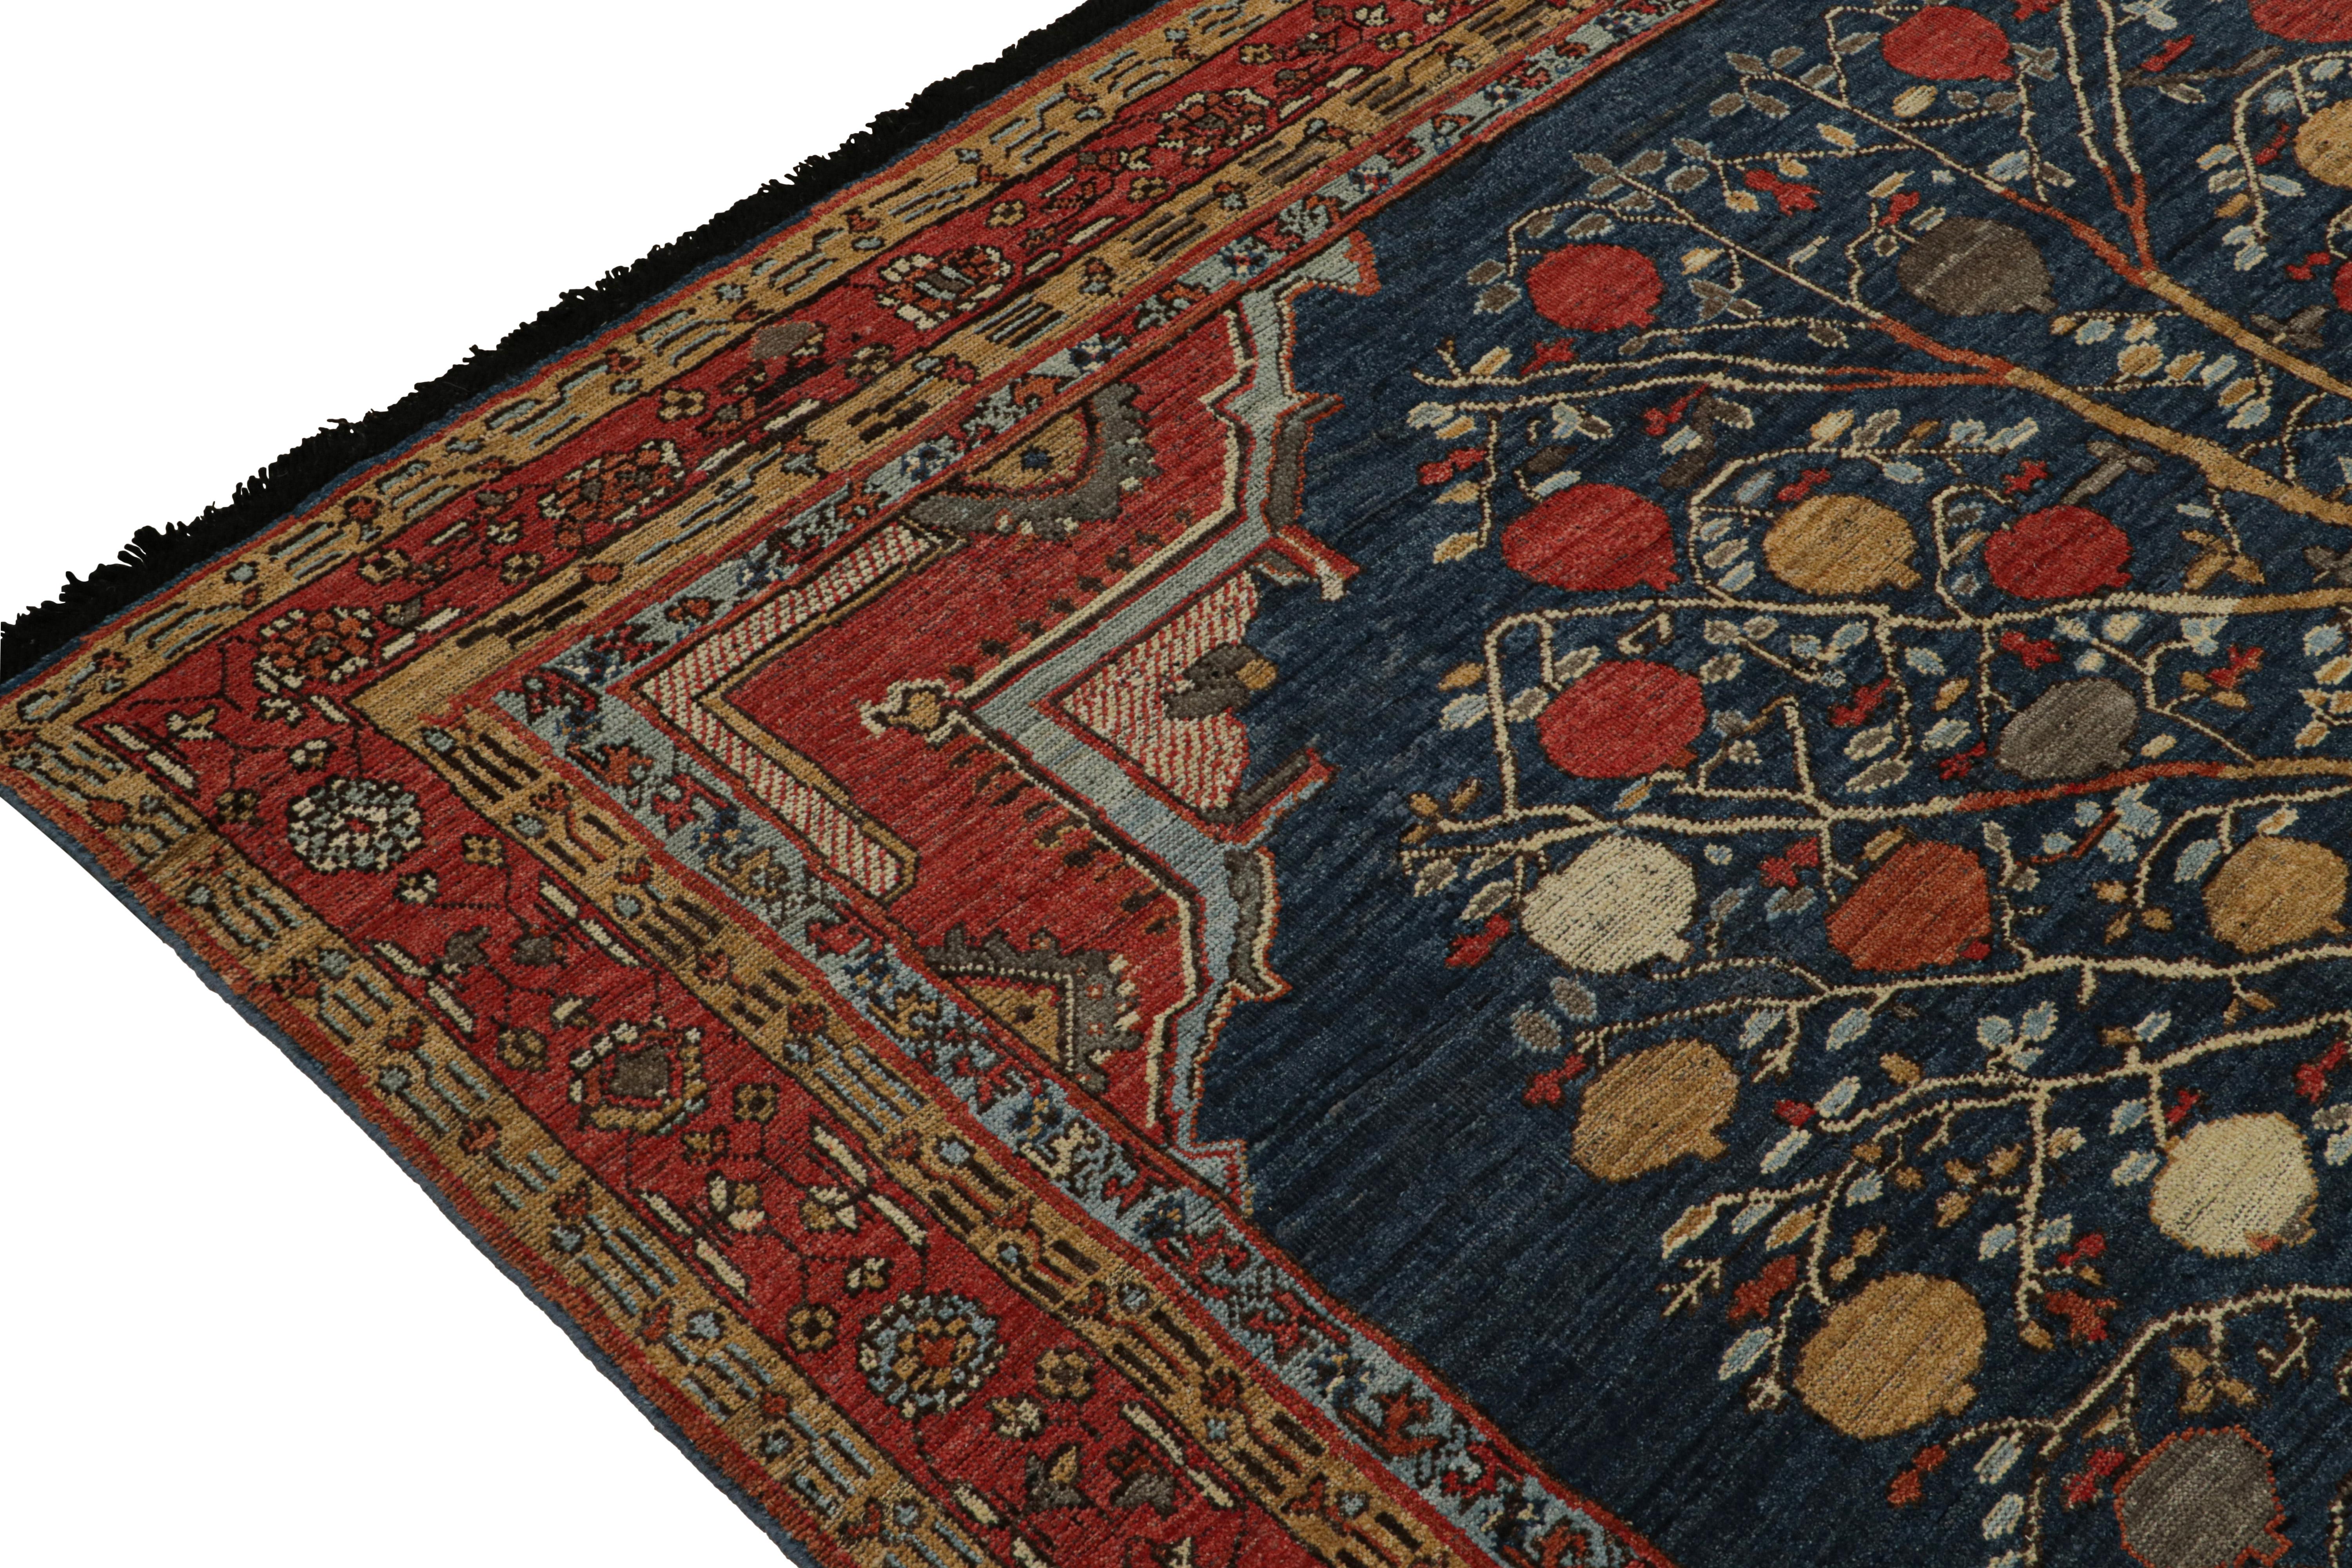 Tribal Rug & Kilim’s Antique Persian Style Rug In Red, Blue & Gold Pictorials For Sale